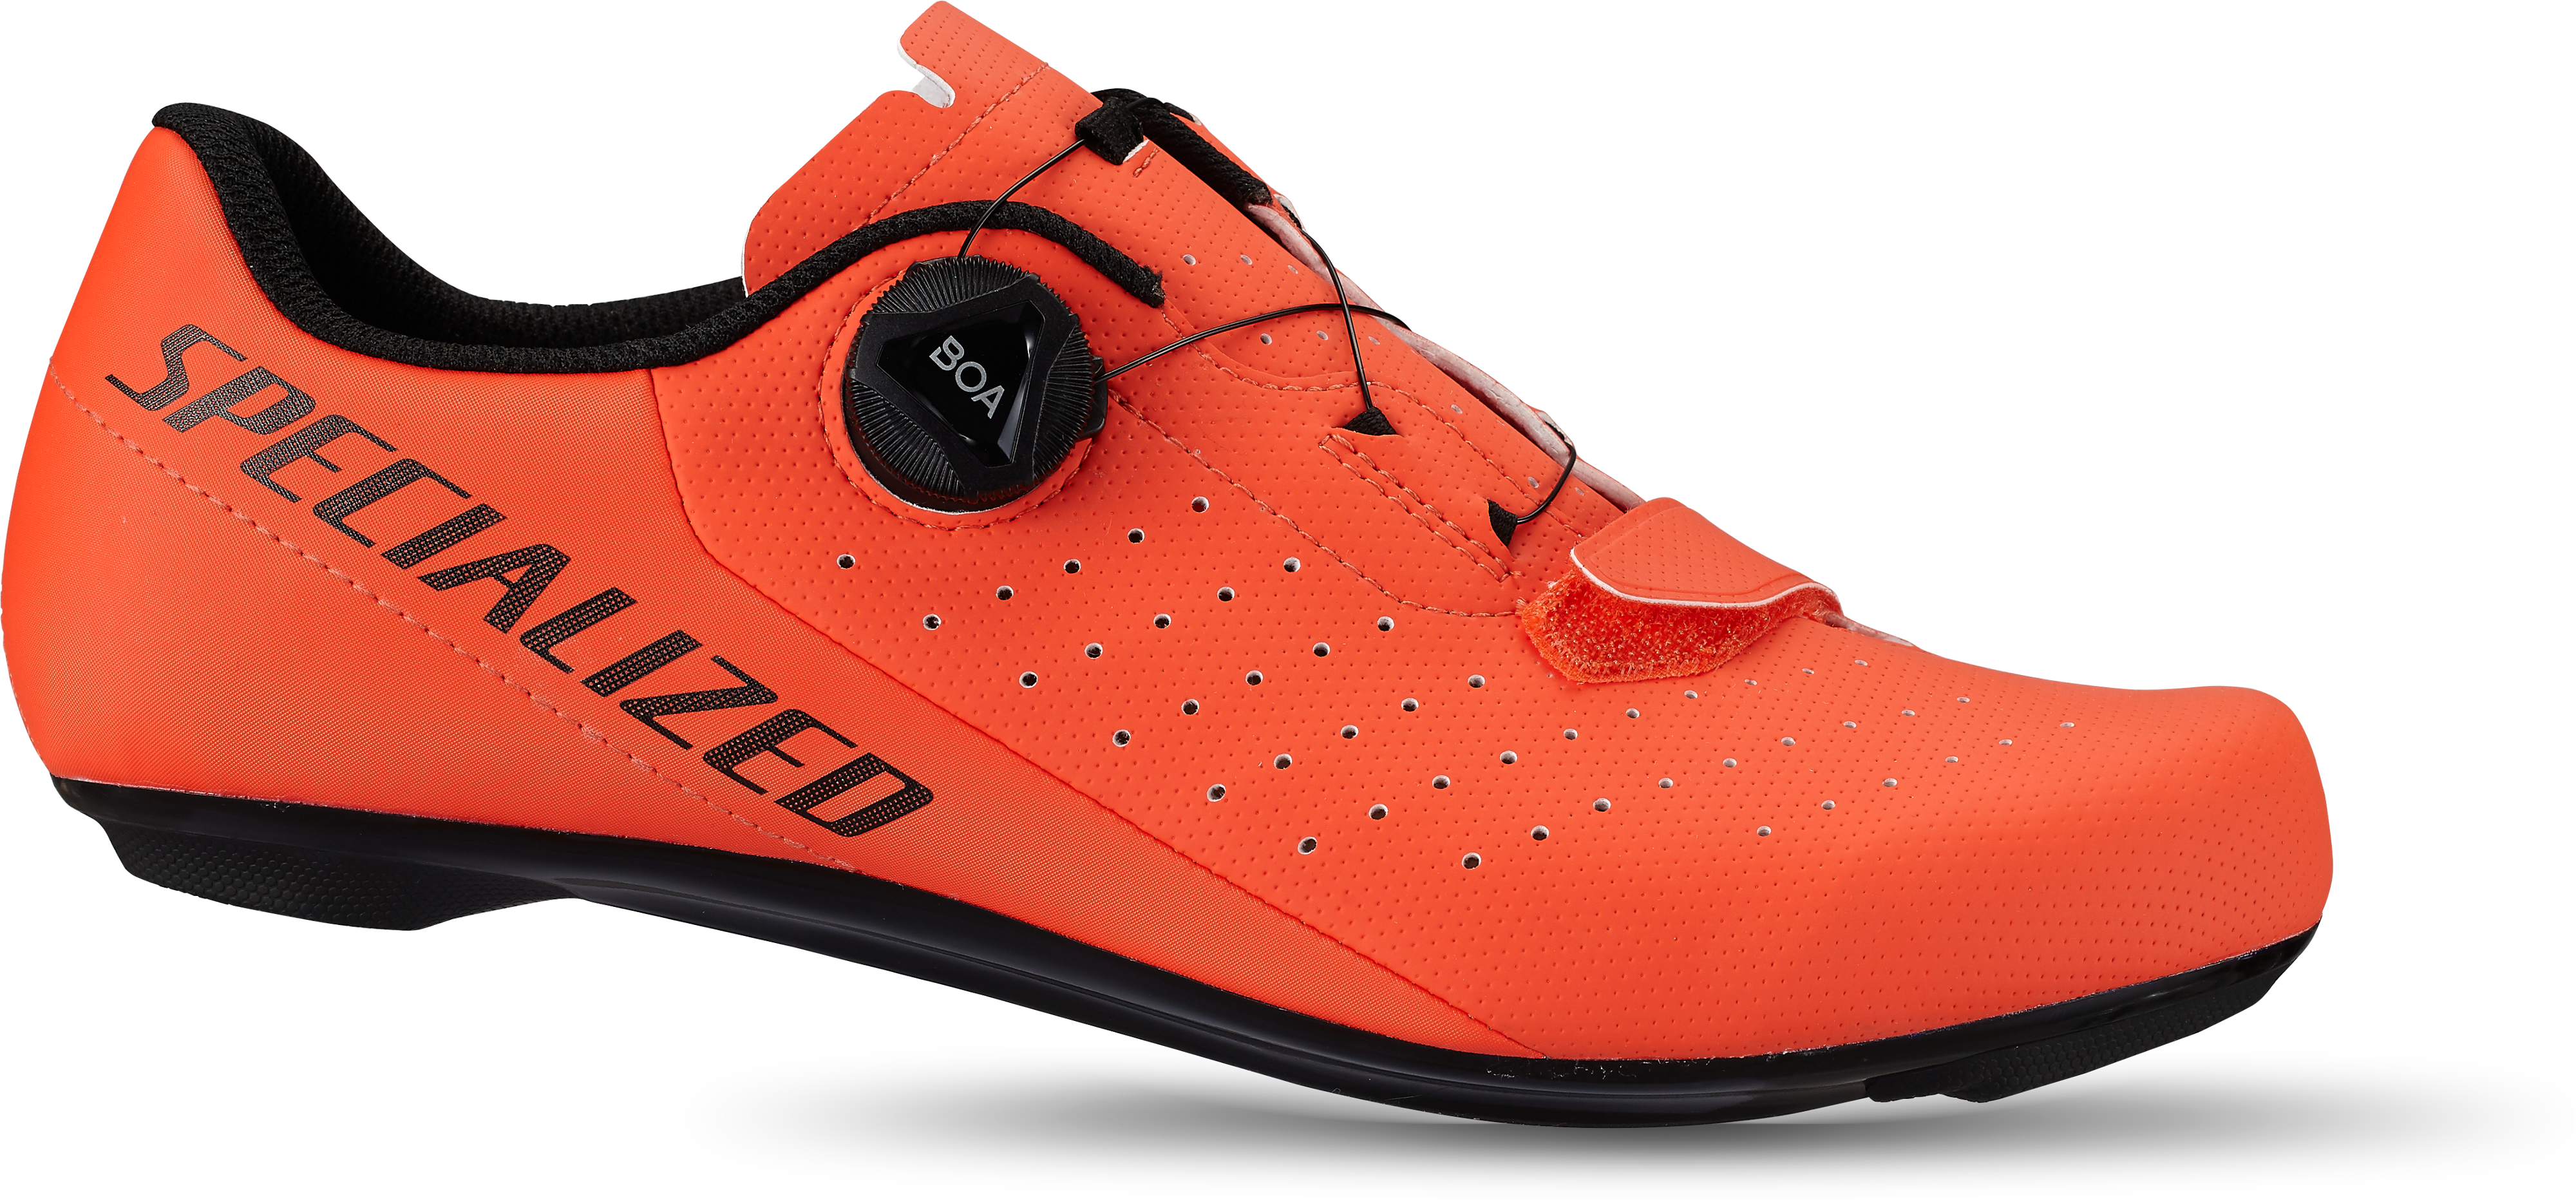 TORCH 1.0 ROAD SHOES CCTSBLM/DUNEWHT/RSTDRED 40(40 (25.5cm 